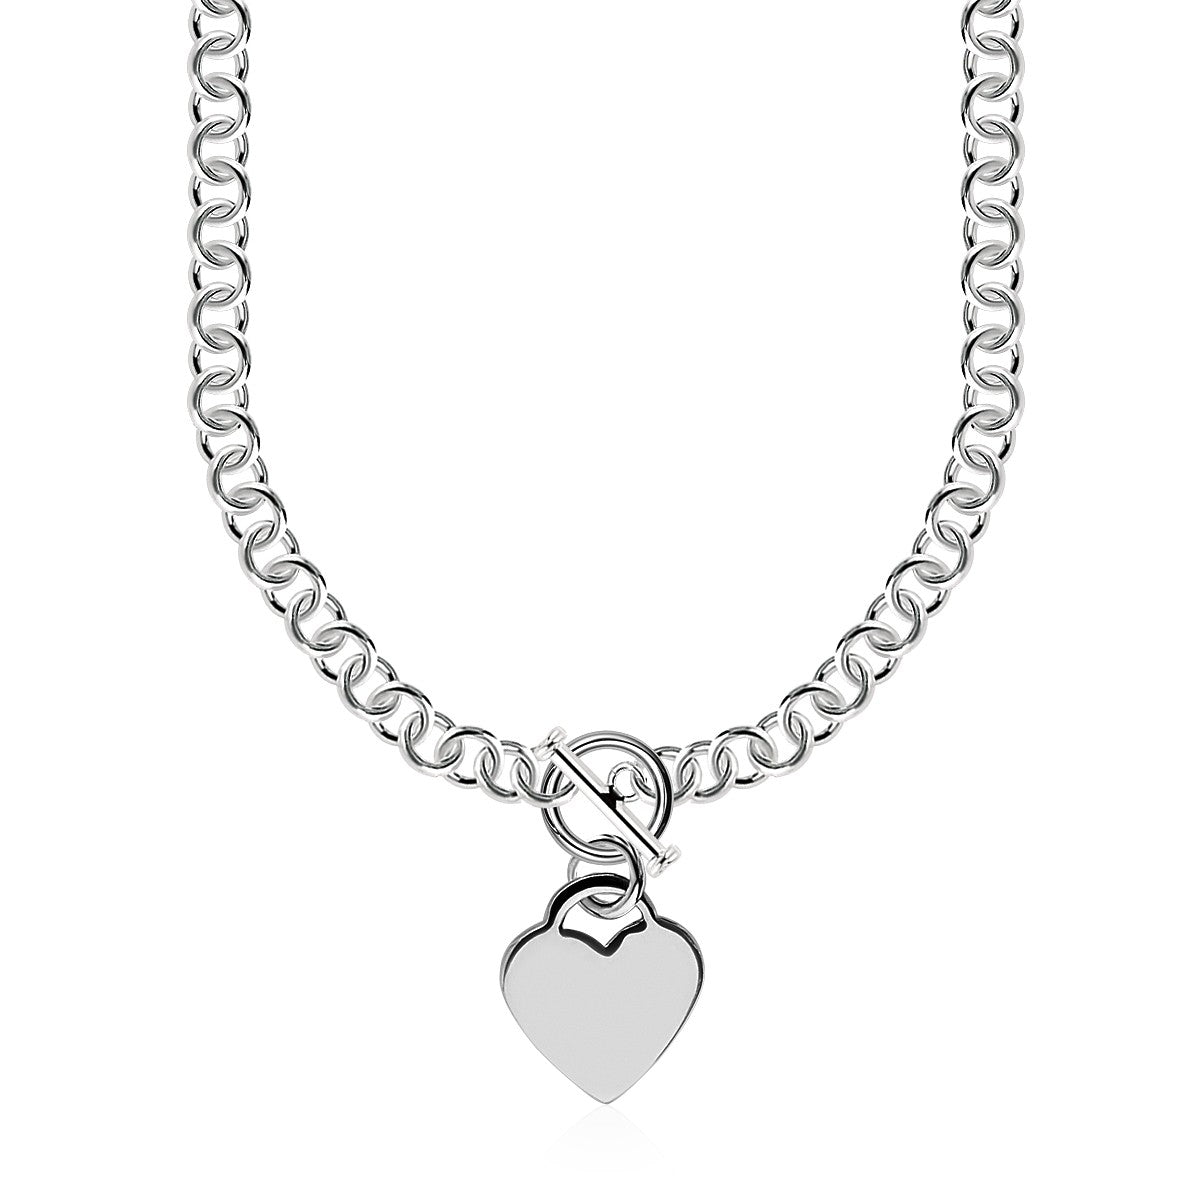 The Heart Toggle Charmed Rolo Chain